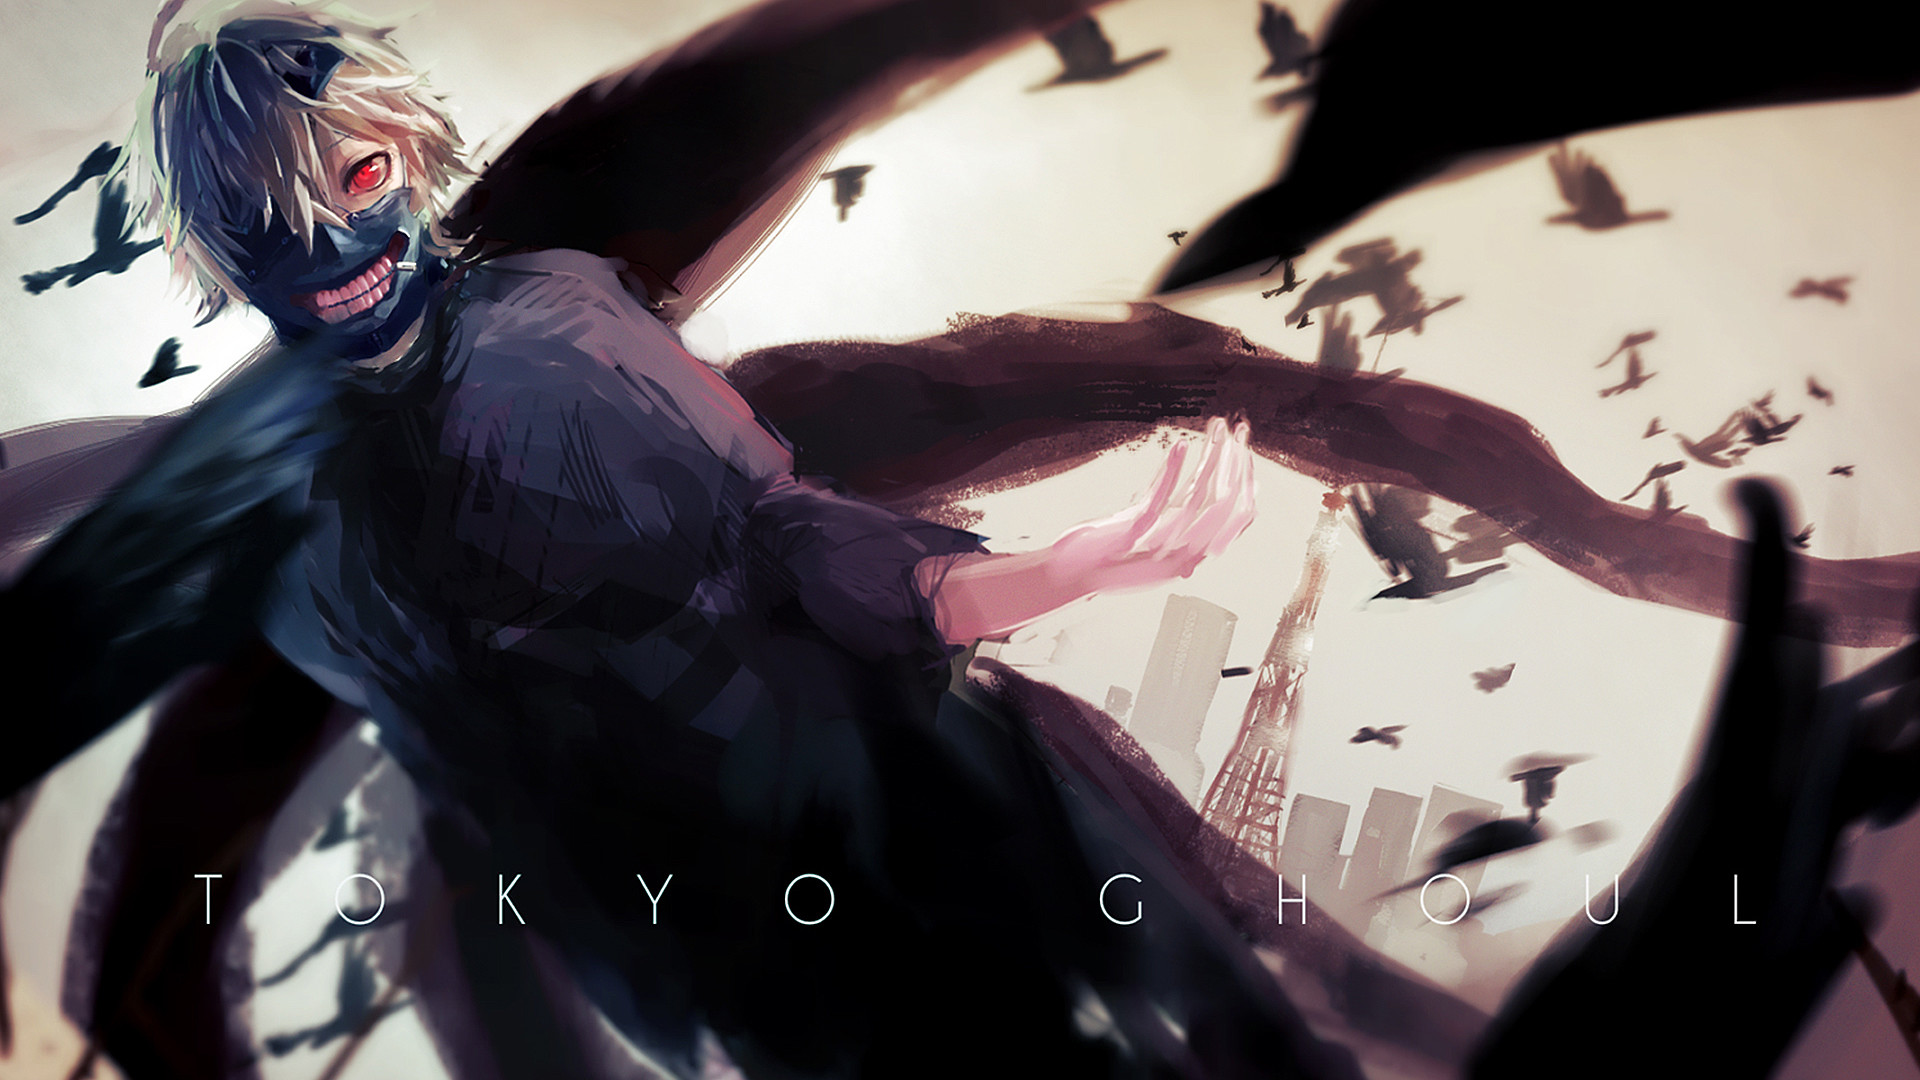 Image for Free Tokyo Ghoul Anime HD Wallpaper 22